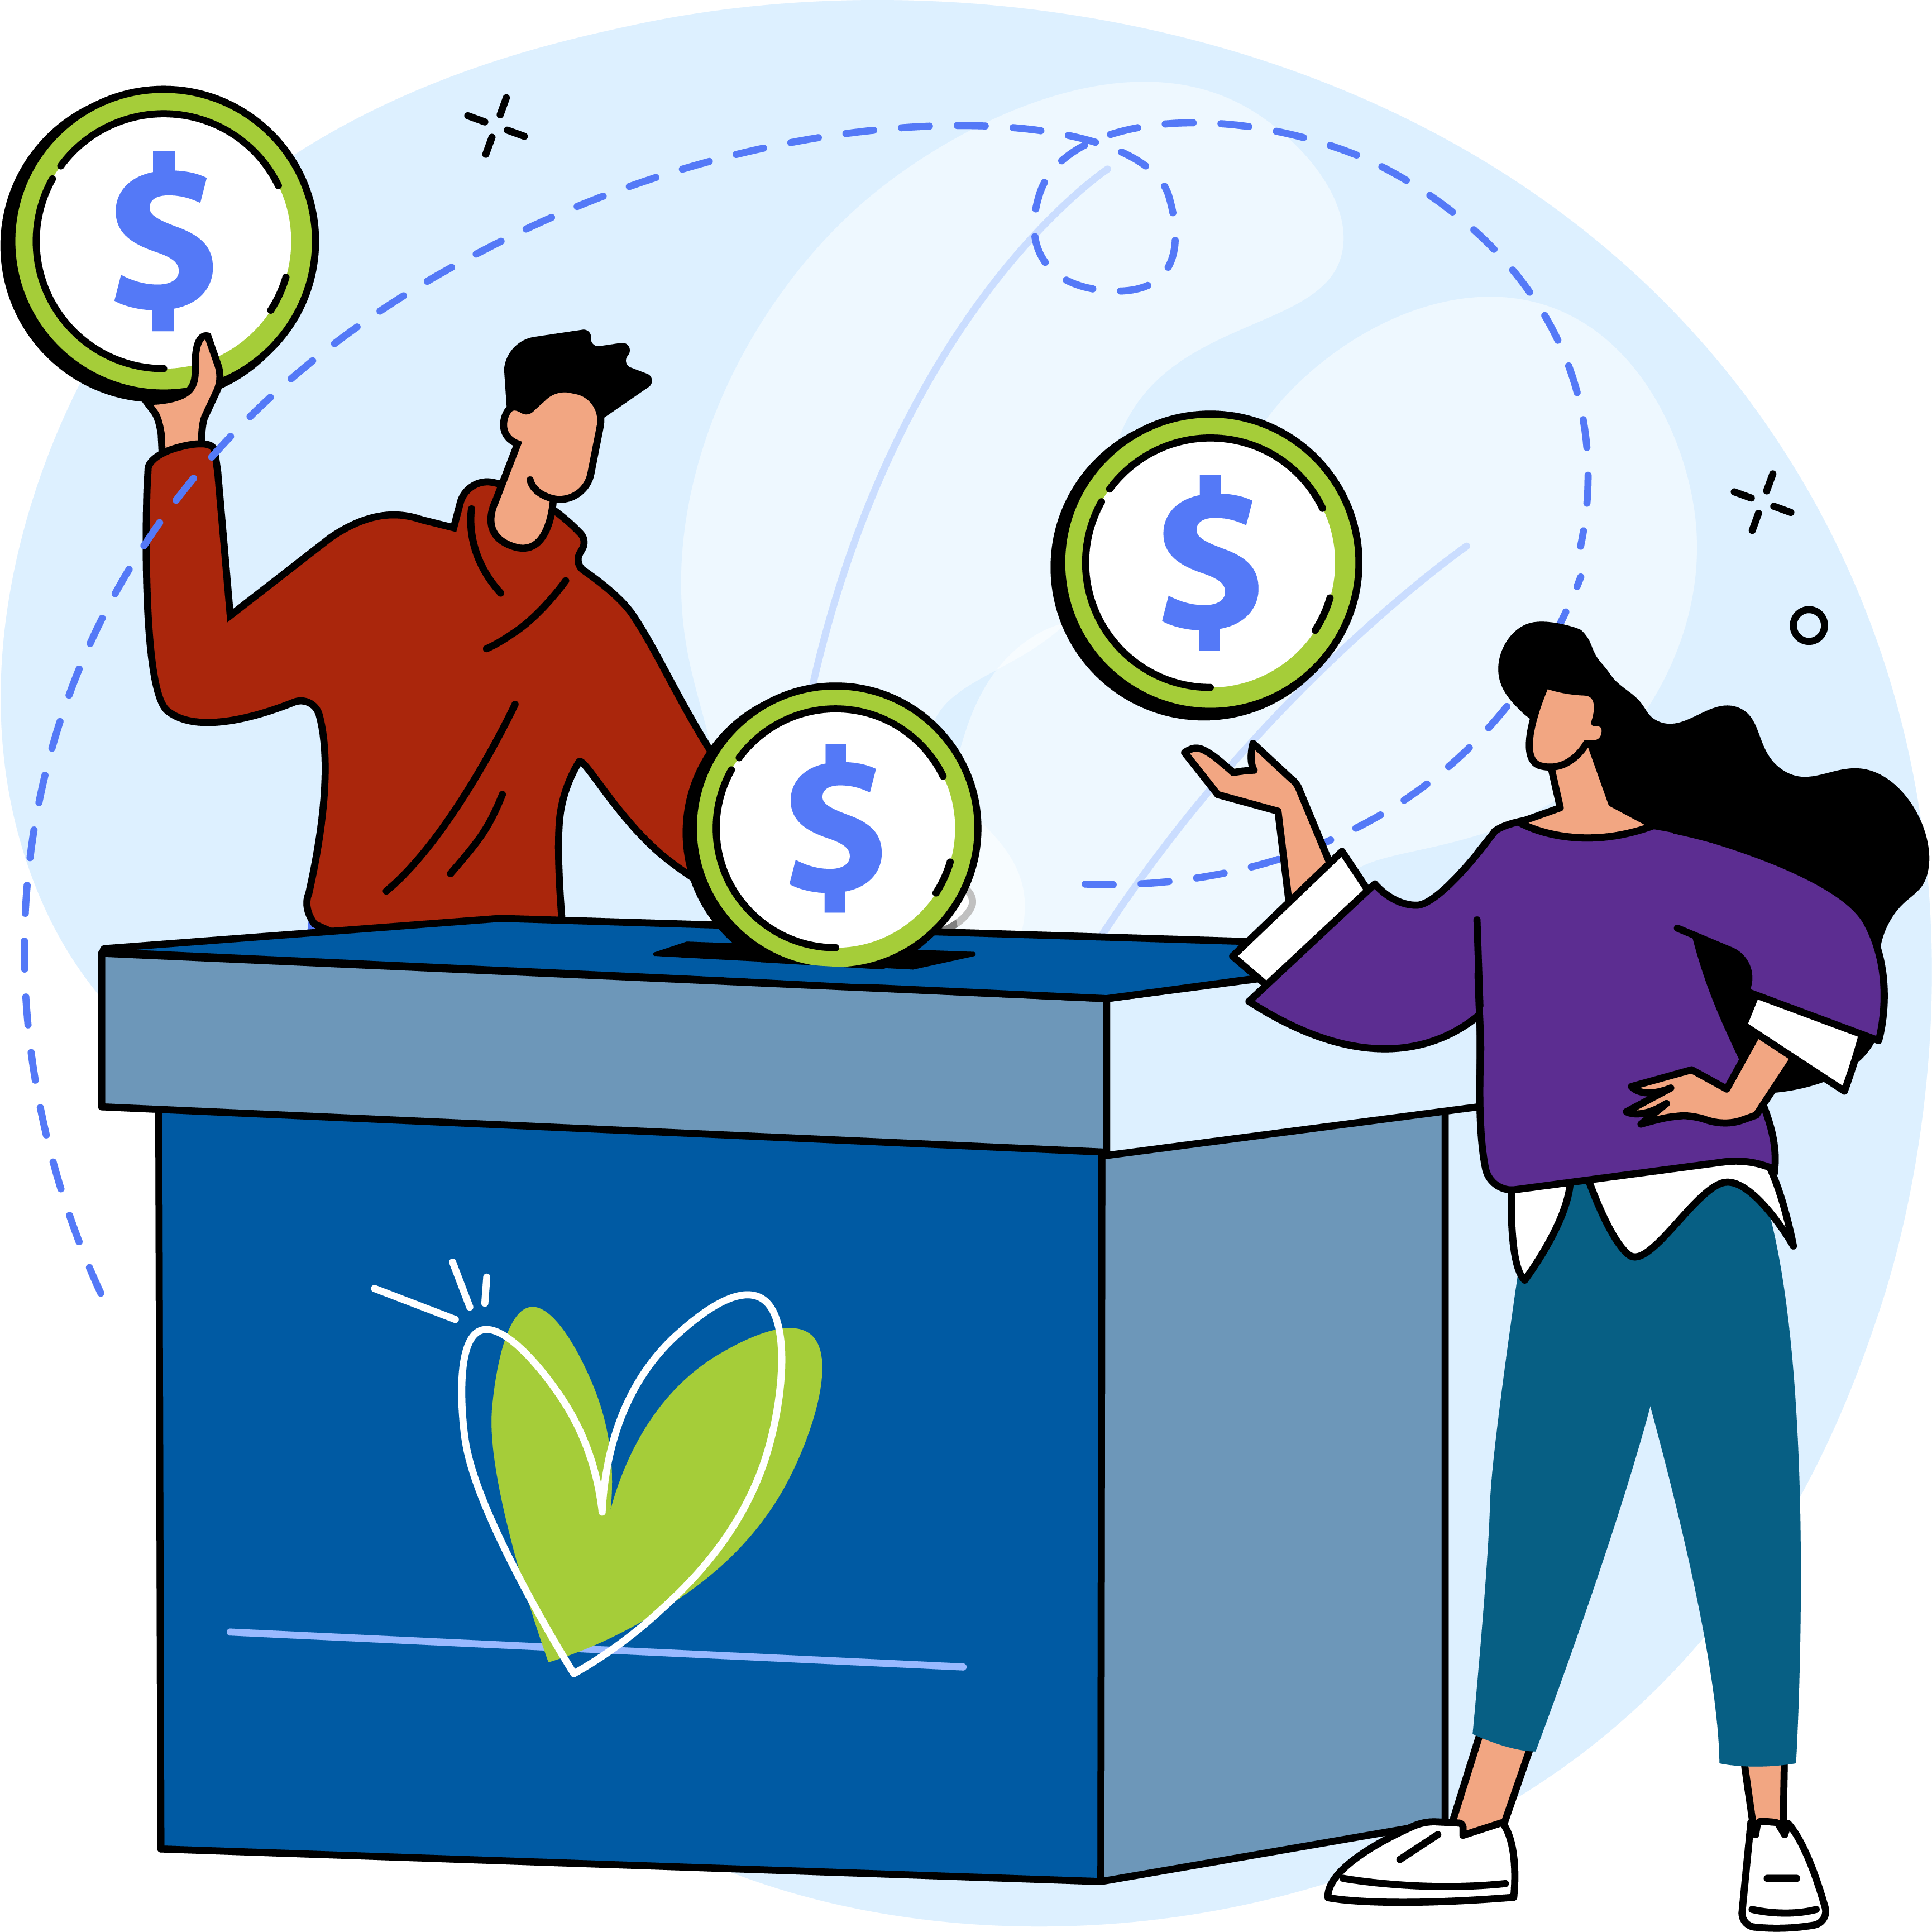 Illustration of two people holding discs with the dollar sign, standing near a large gift box with a heart design